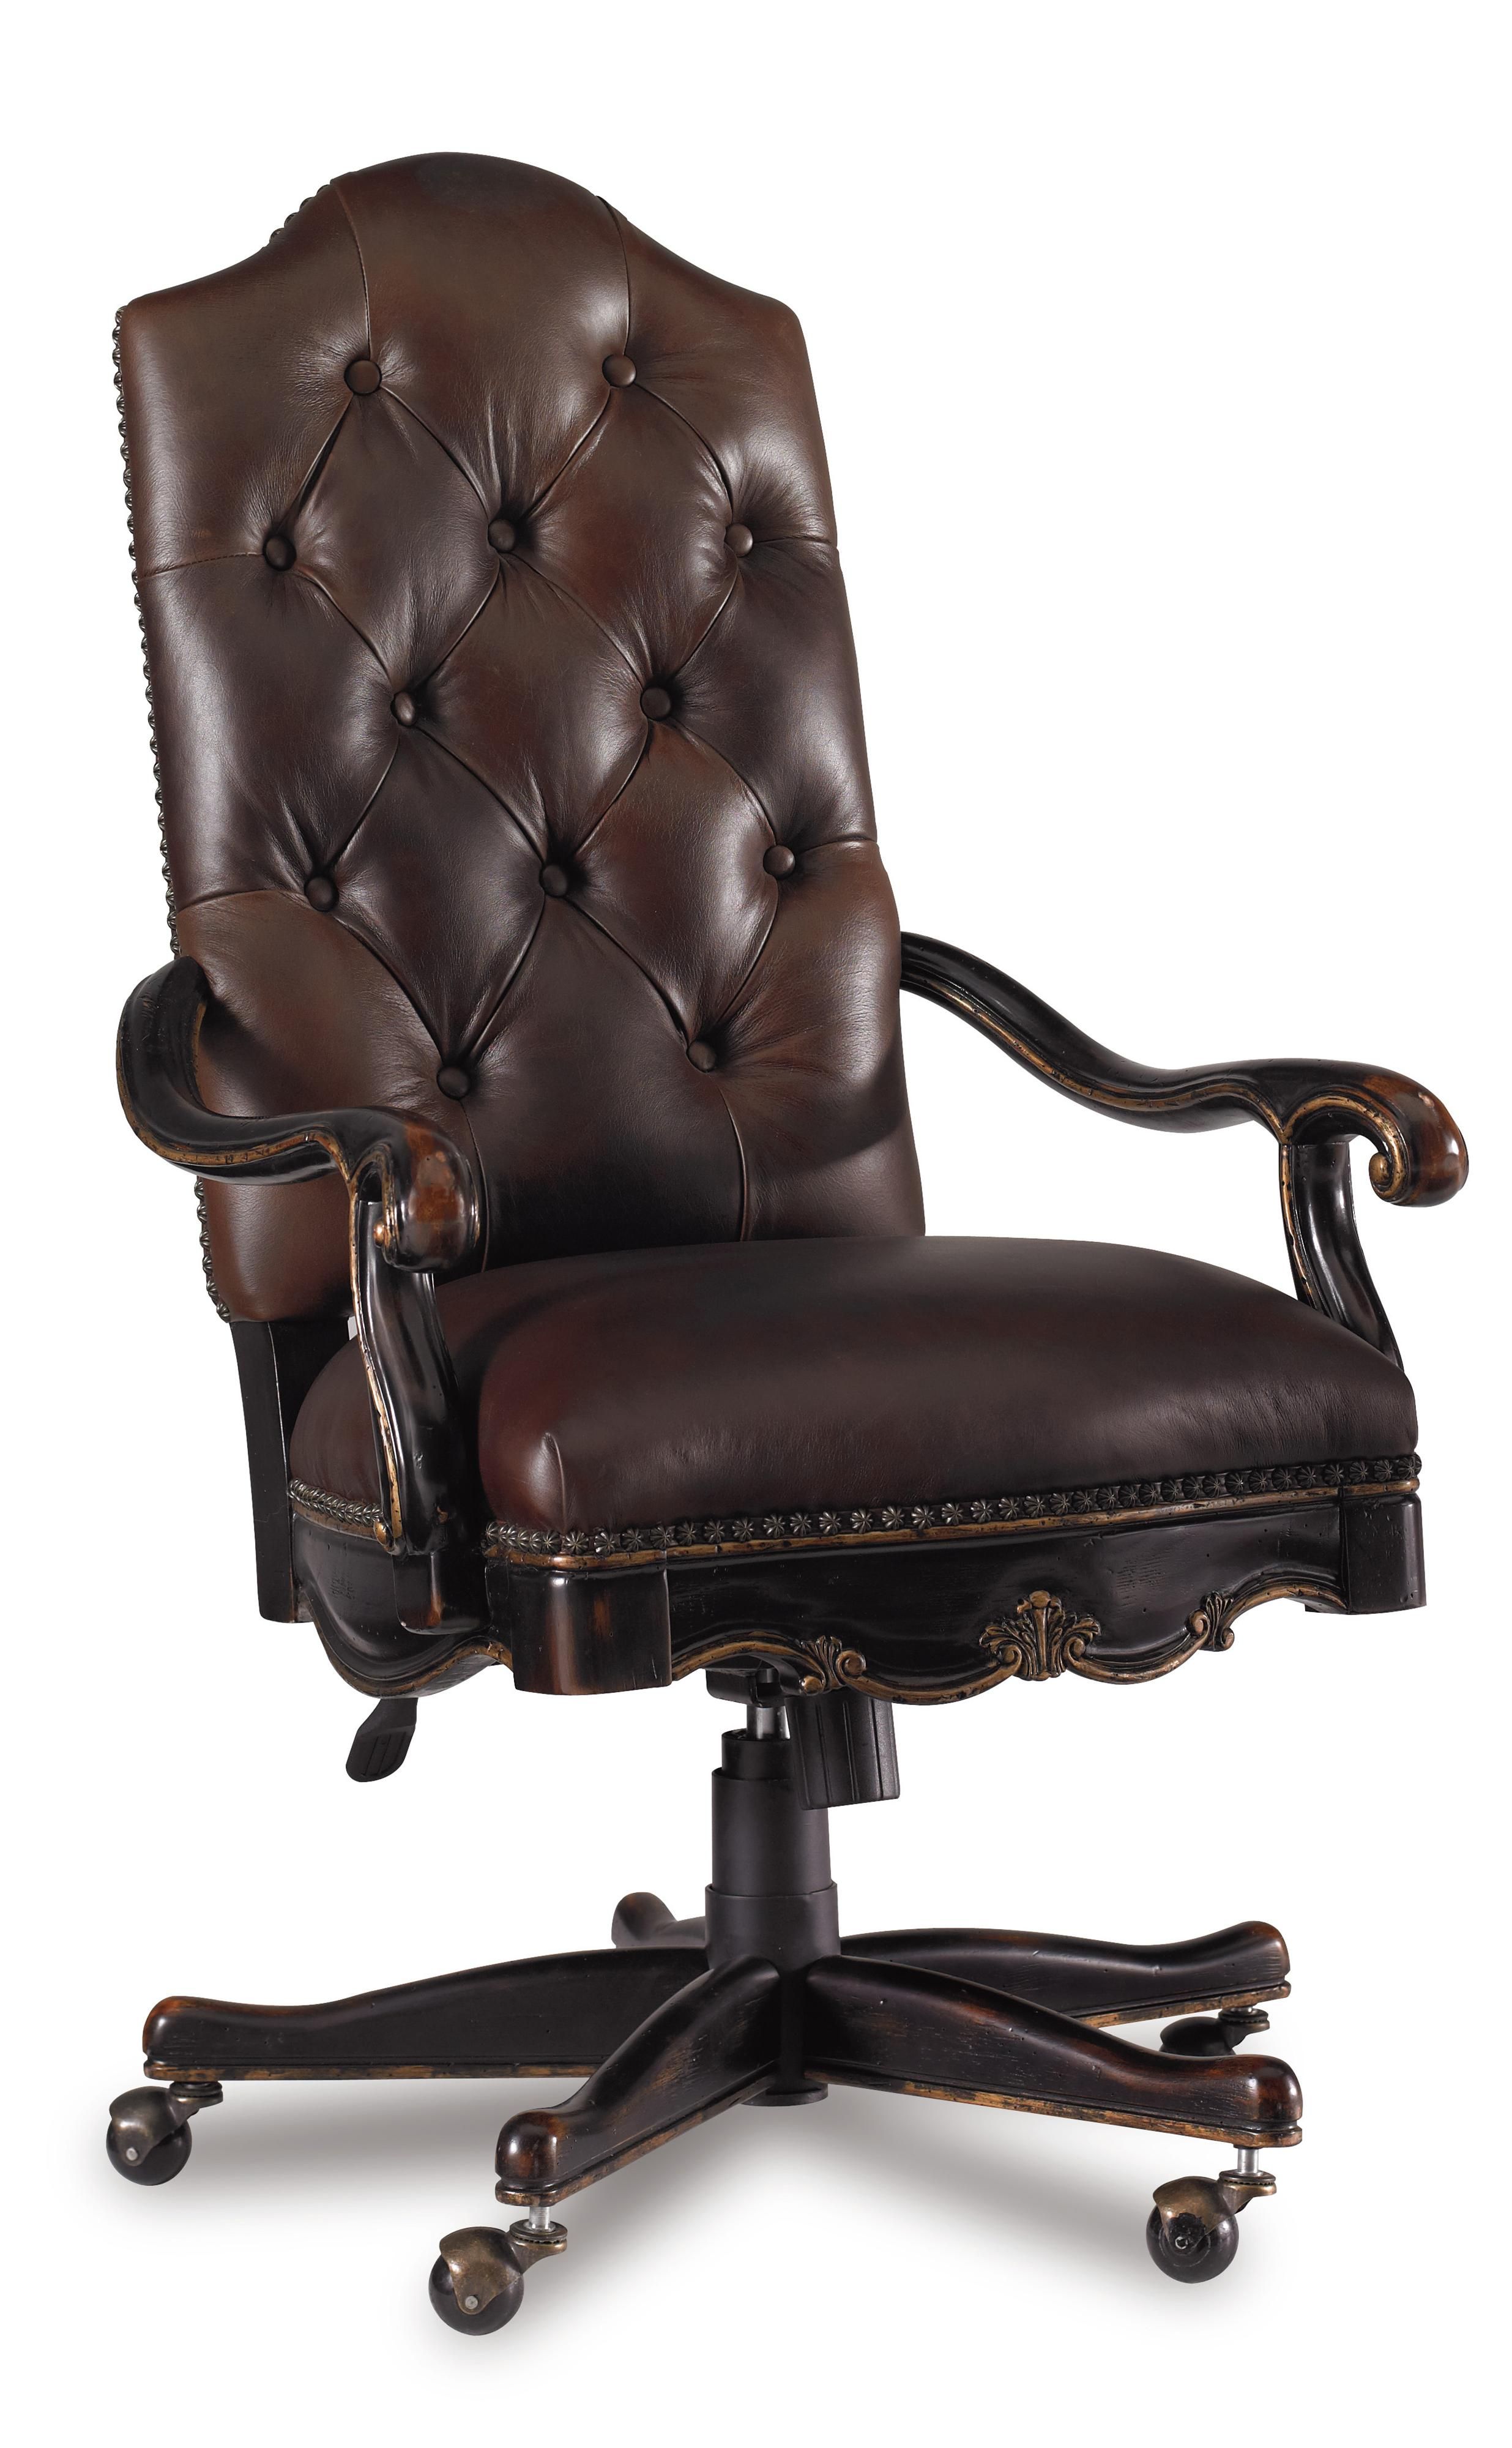 Hooker Furniture Grandover Tufted Leather Executive Office Chair With Regard To Chocolate Brown Leather Tufted Swivel Chairs (View 14 of 20)